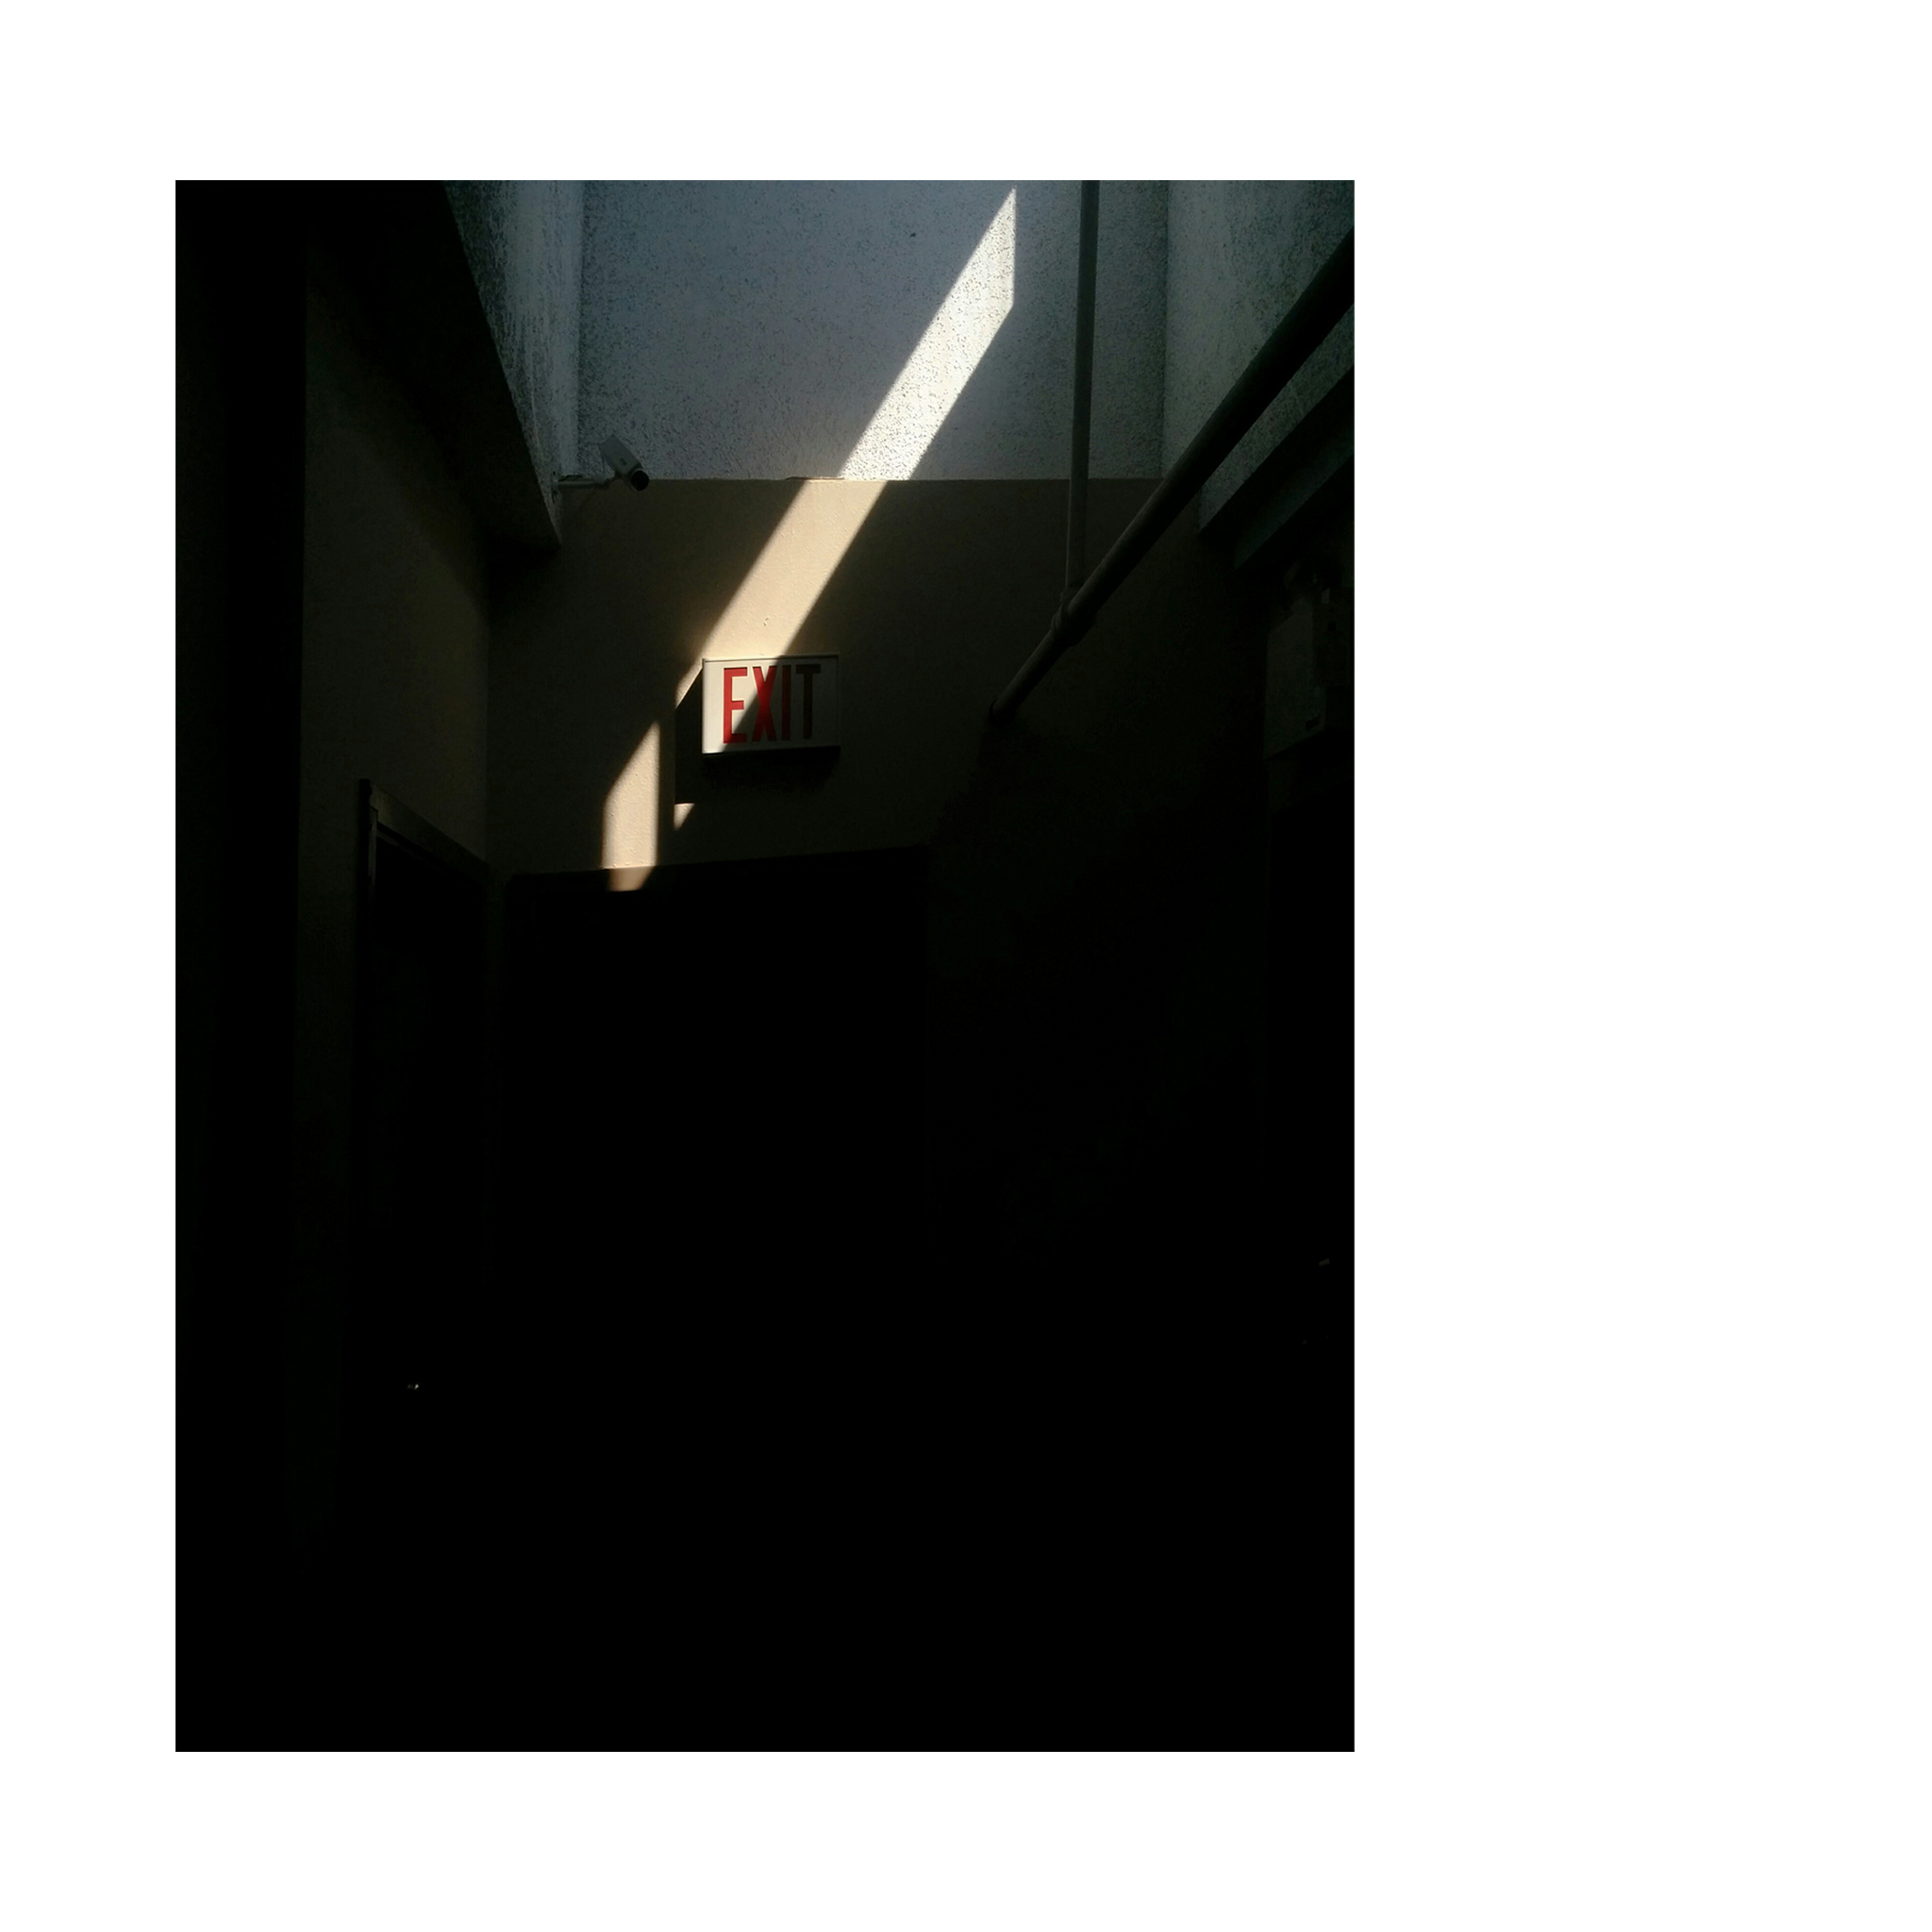 spot light and exit sign